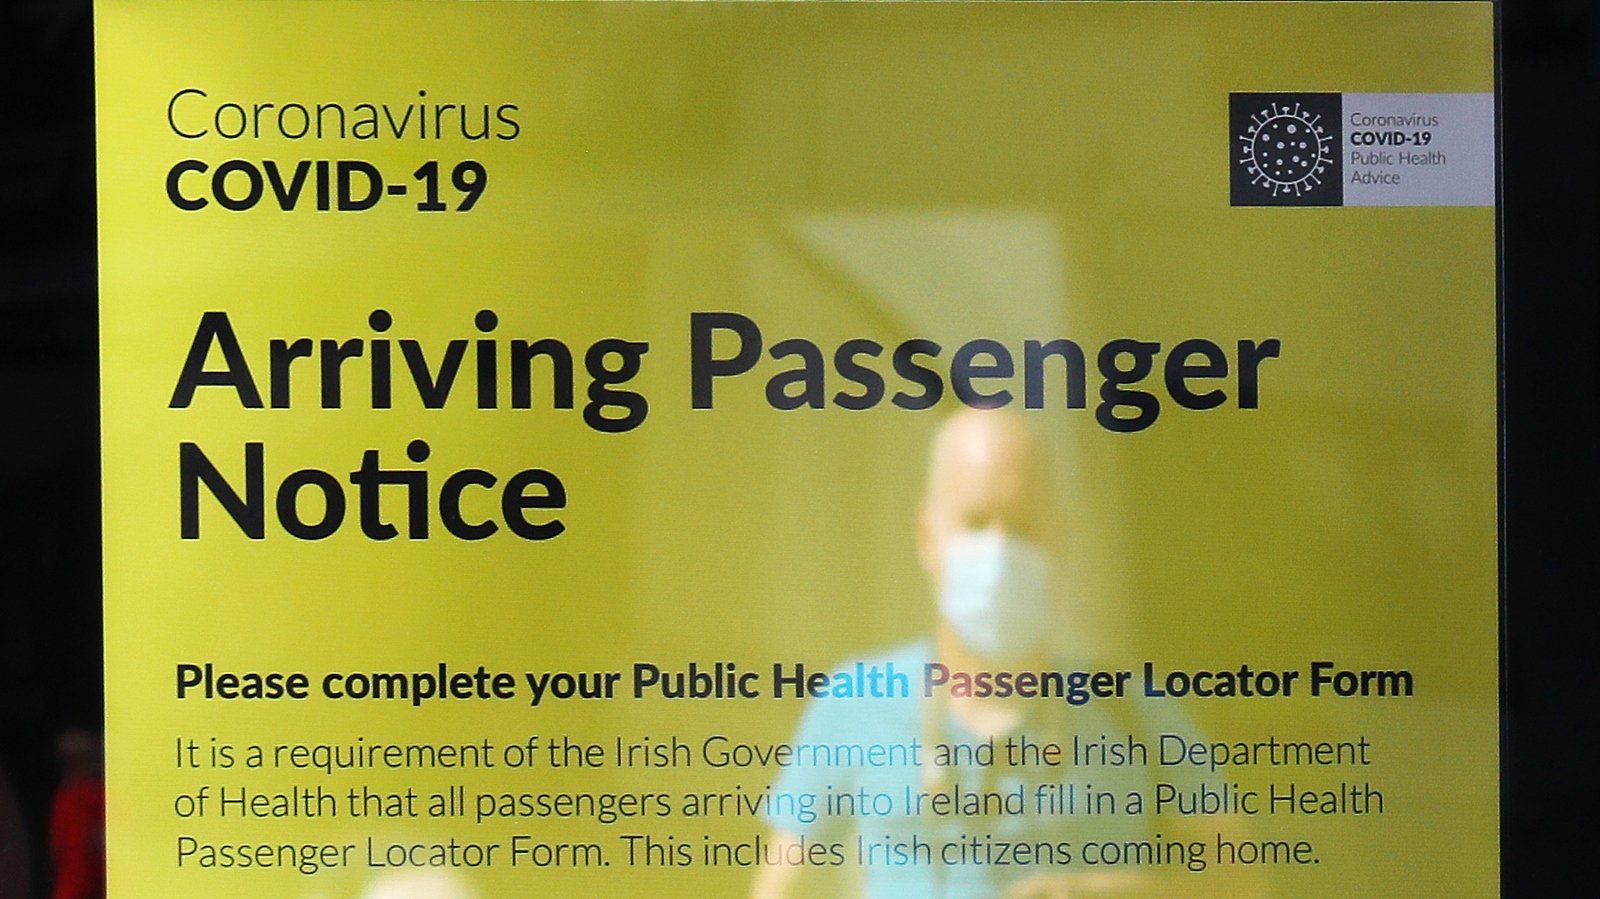 Passenger locator form online from 26 August